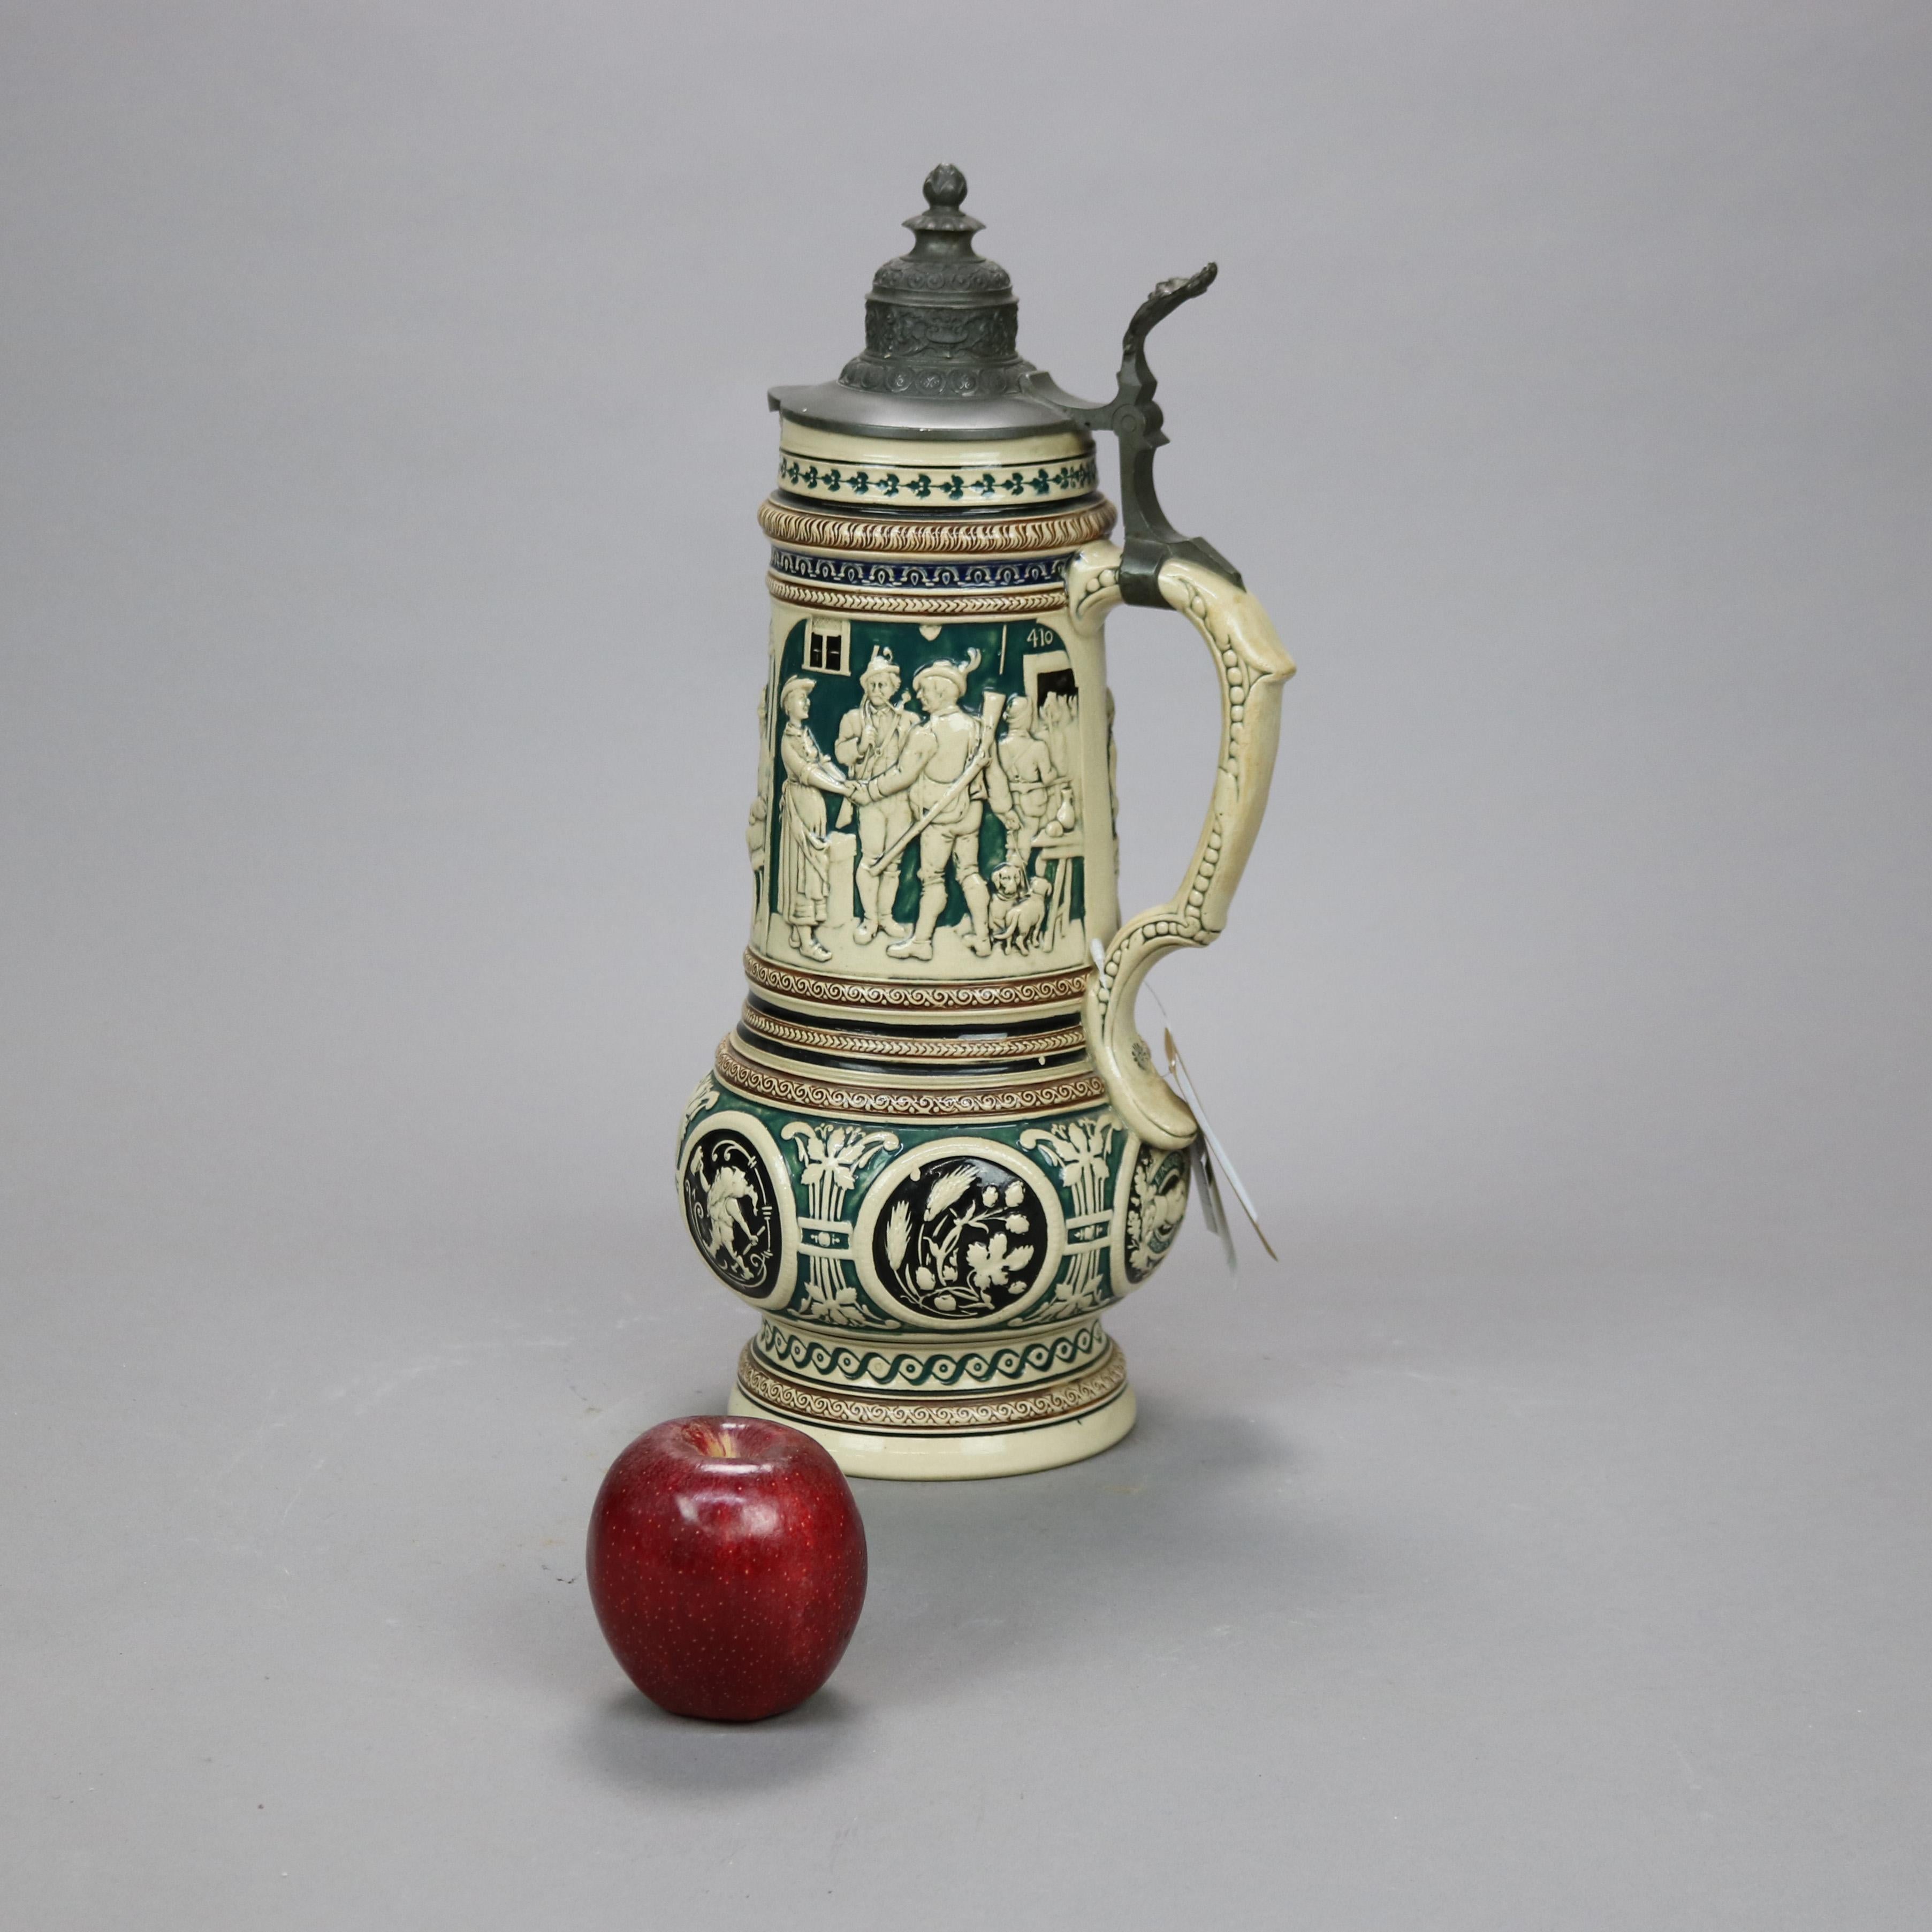 An antique and large German beer stein offers stoneware construction with genre scenes and hinged pewter lid, c1900

Measures - 15.75'' H x 8'' W x 8'' D.

Catalogue Note: Ask about DISCOUNTED DELIVERY RATES available to most regions within 1,500